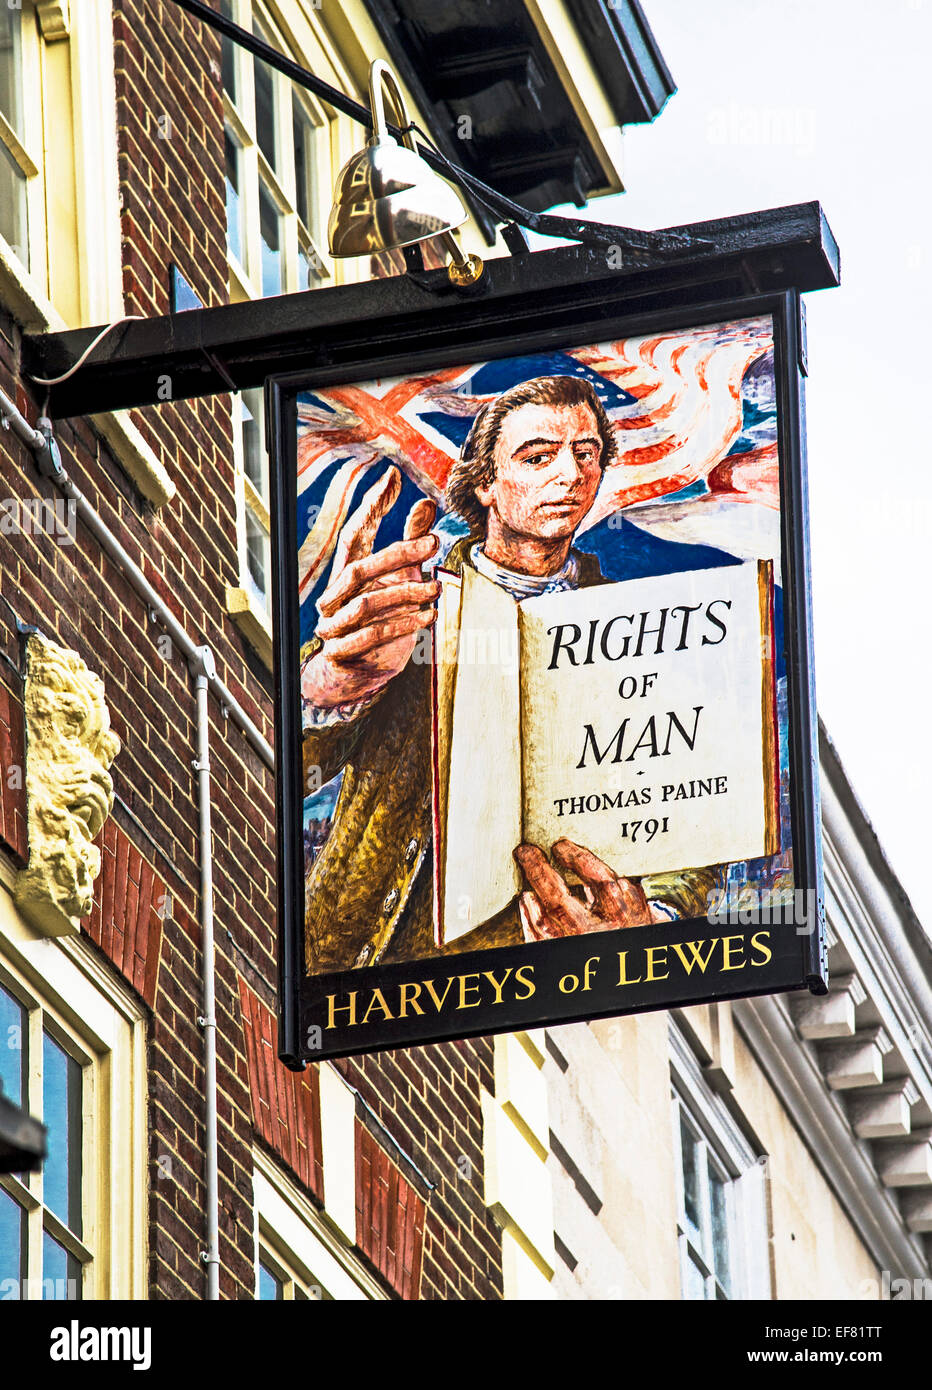 Pub Sign in Lewes, showing Thomas Paine; Rights of Man Stock Photo